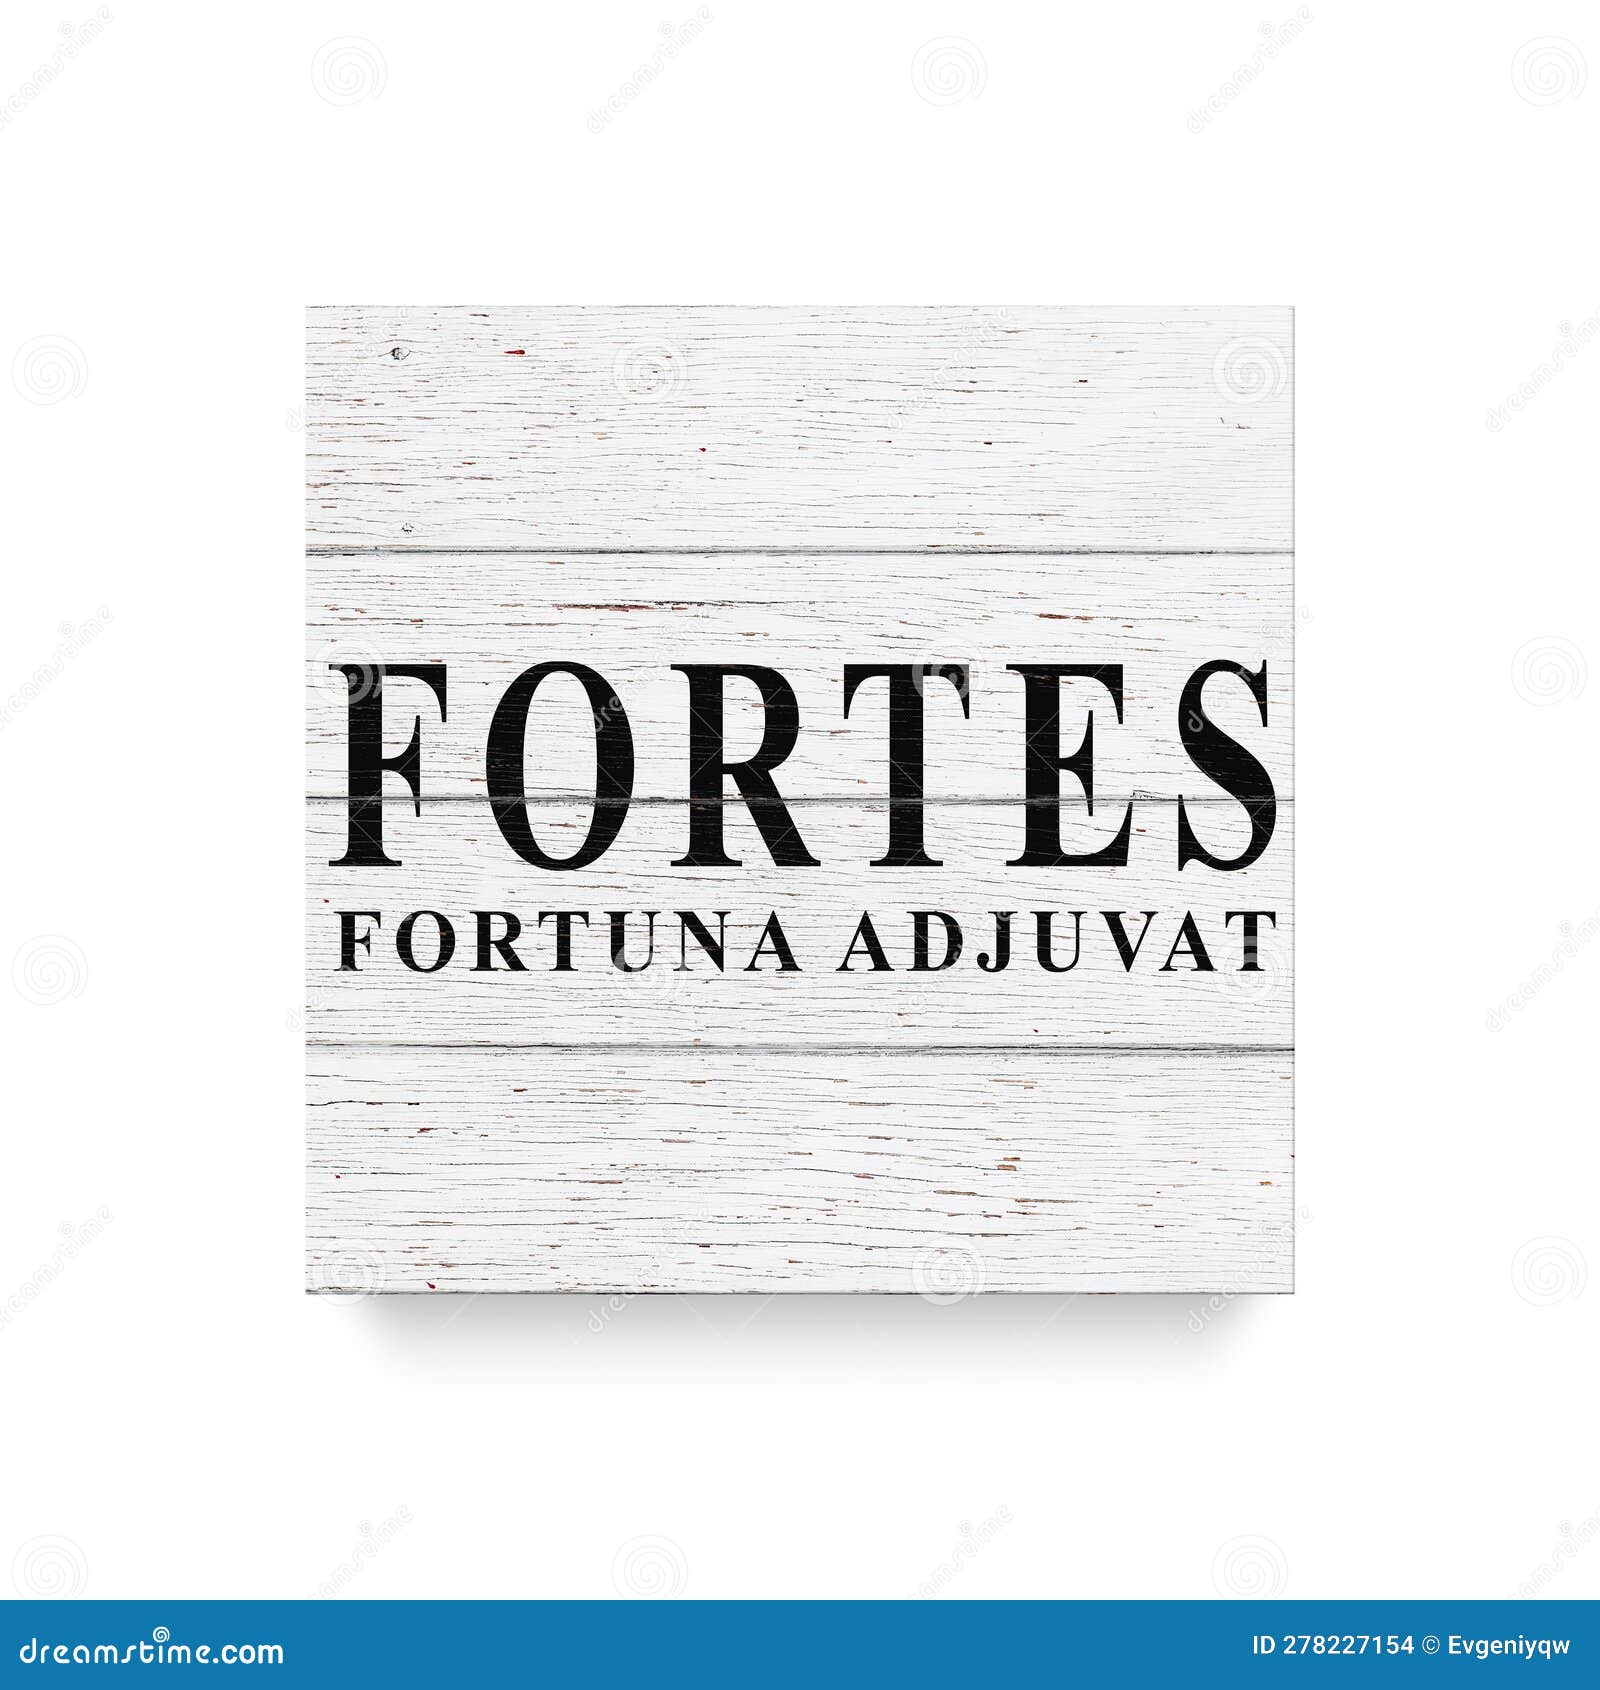 Sign Fortes Fortuna Adjuvat - Fortune Favors the Brave. White Wooden Wall,  Boards Stock Photo - Image of light, floor: 278227154